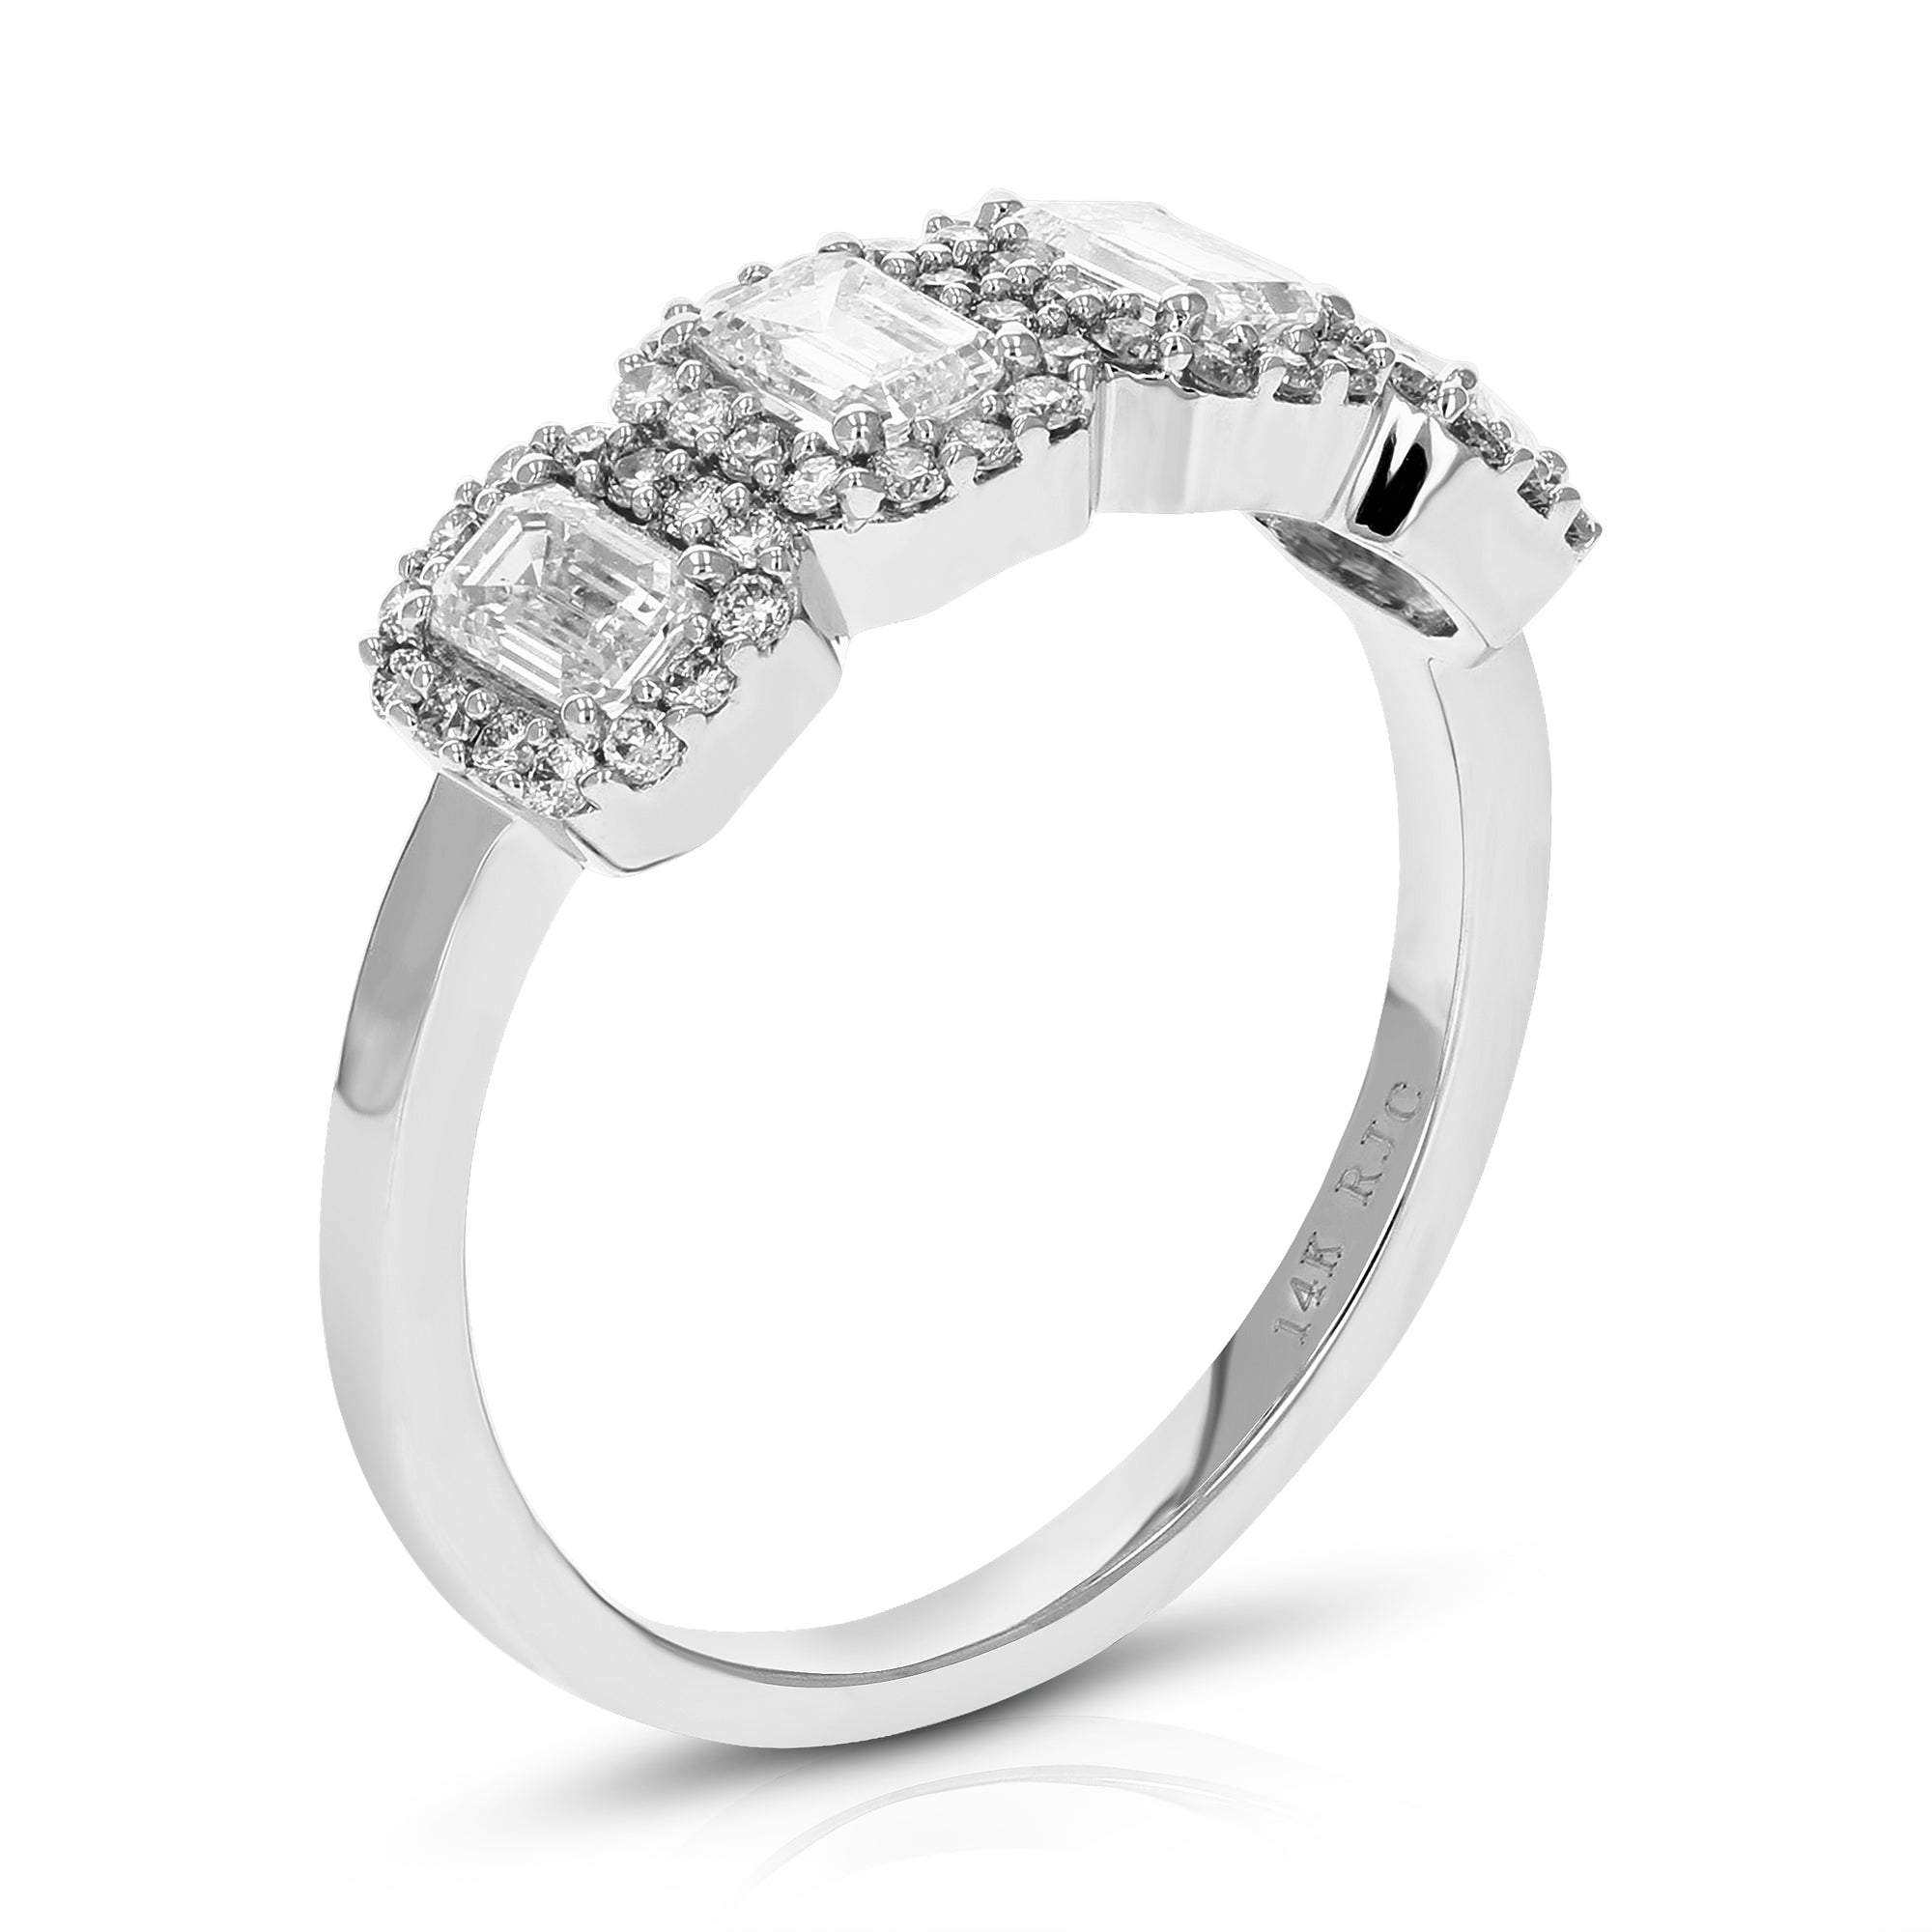 1 cttw Emerald Cut Lab Grown Diamond Engagement Ring 60 Stones 14K White Gold Prong Set 3/4 Inch